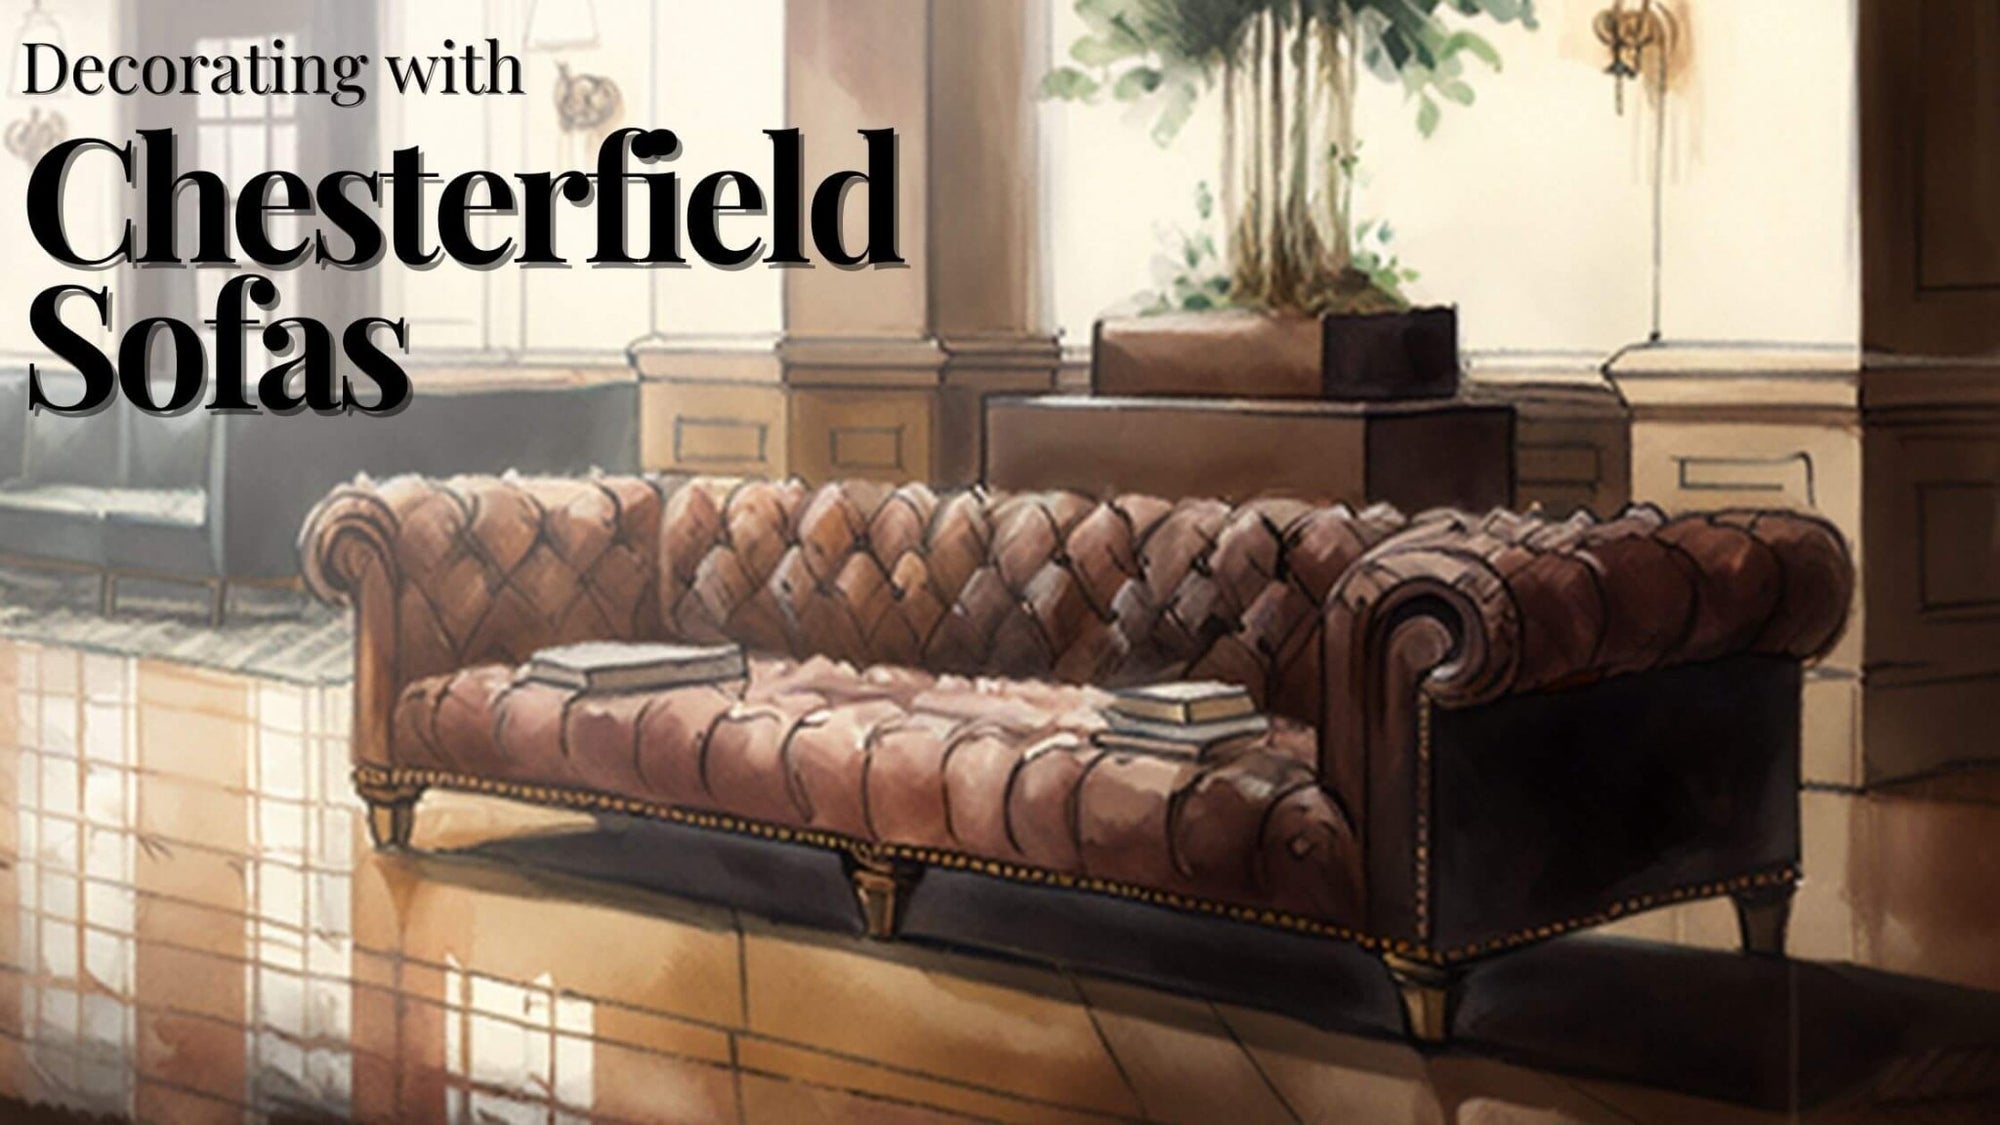 Decorating With Chesterfield Sofas - English Georgian America